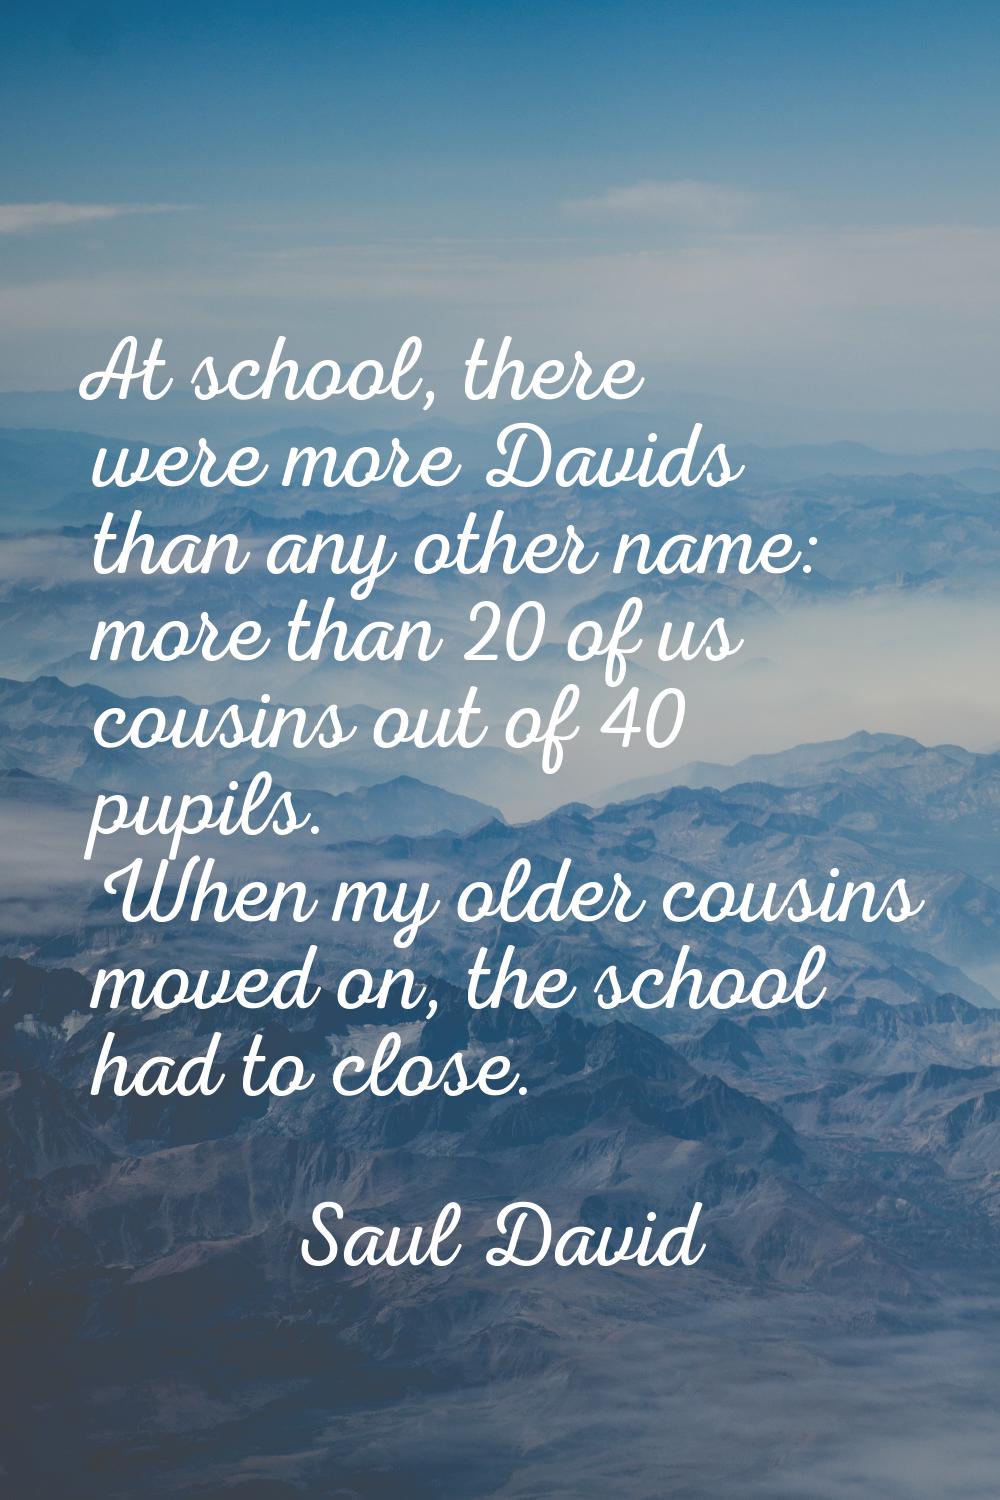 At school, there were more Davids than any other name: more than 20 of us cousins out of 40 pupils.